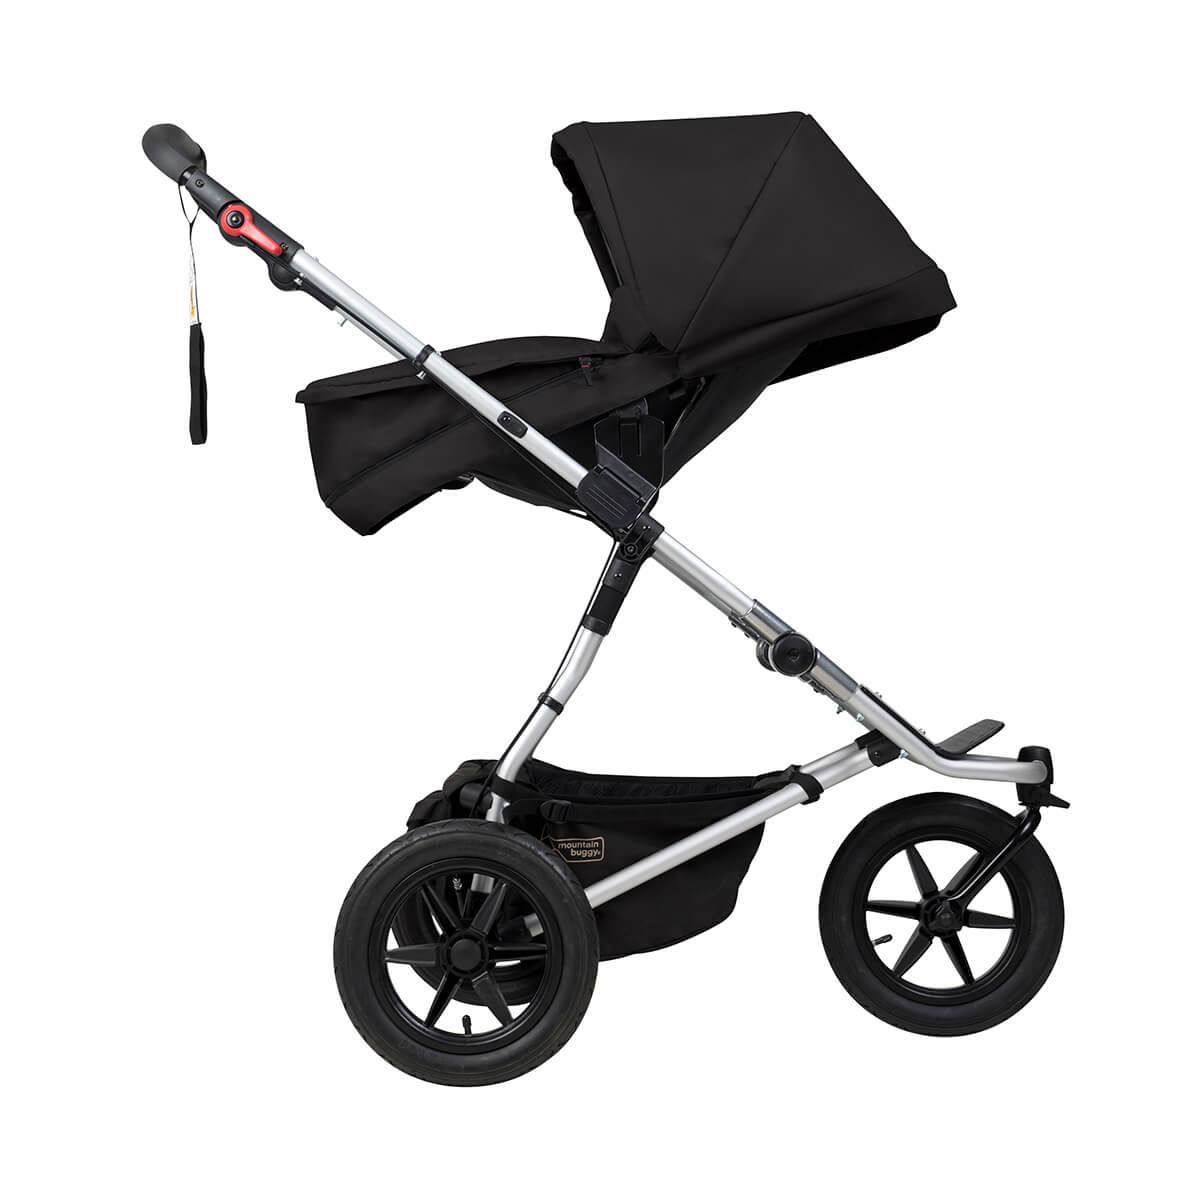 Mountain Buggy carrycot plus on urban jungle buggy in parent facing seat mode in colour black_black